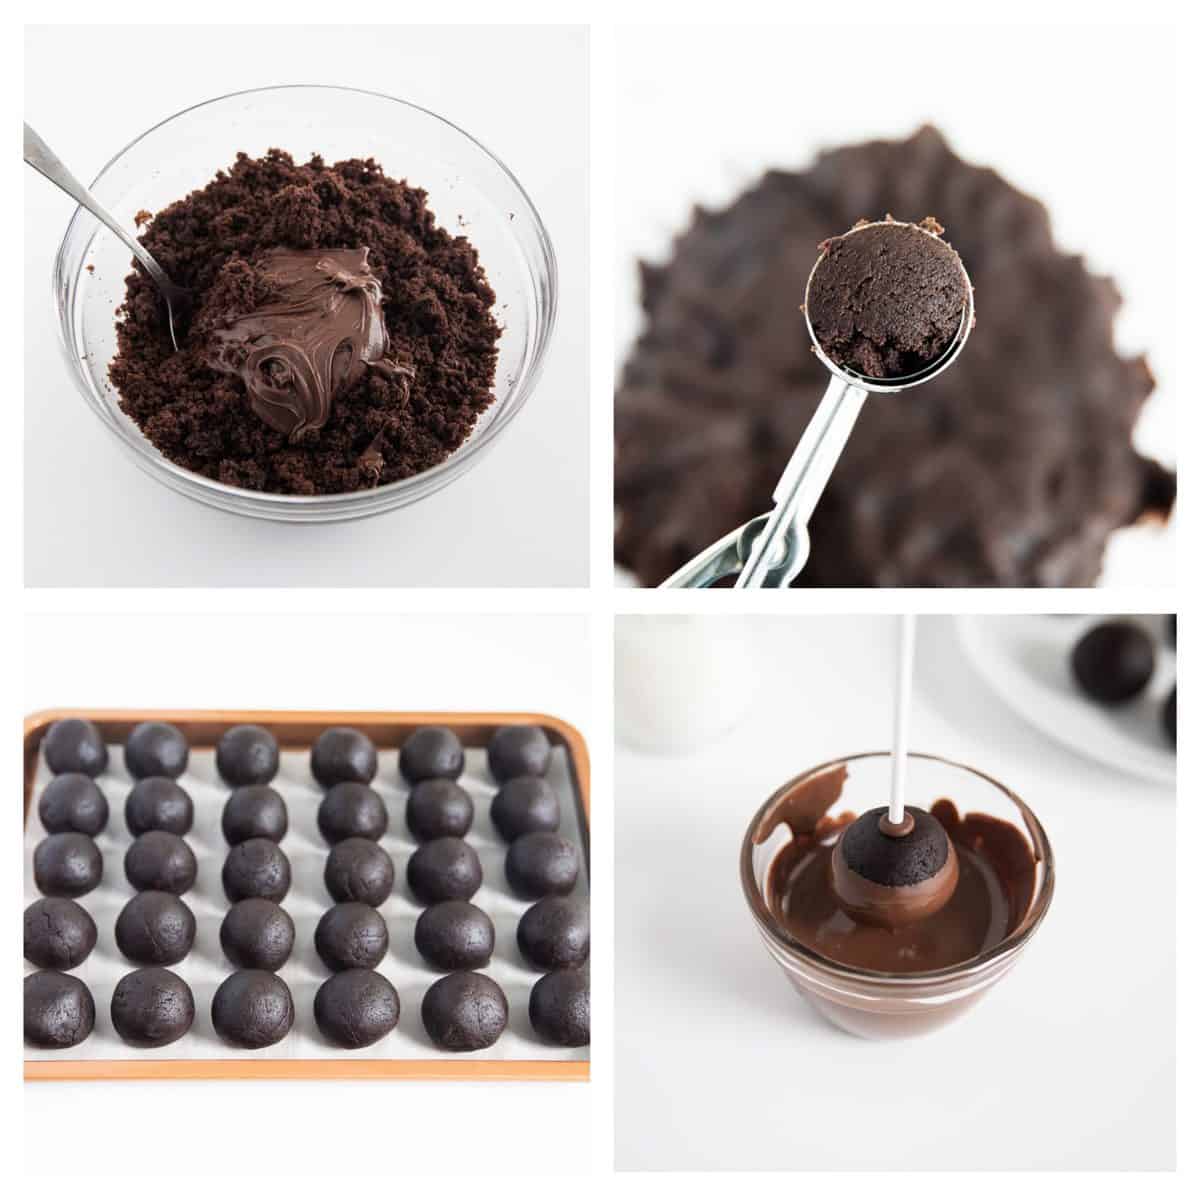 Chocolate cake pop ingredients collage.